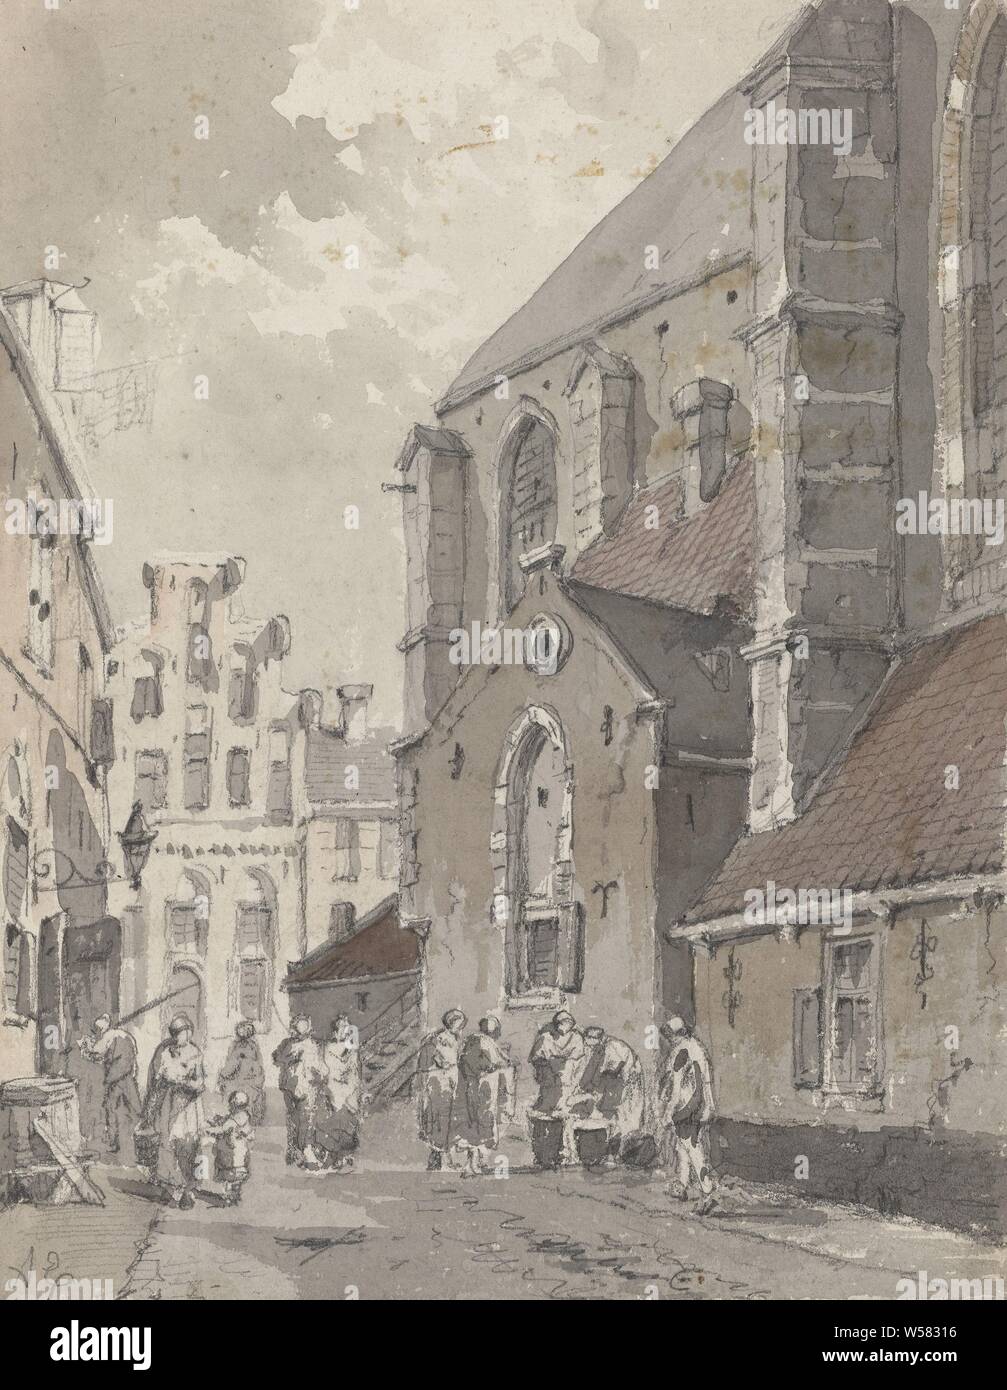 View in Amersfoort, right part of the St. Joriskerk, Adrianus Eversen (mentioned on object), 1828 - 1897, paper, pencil, brush Stock Photo